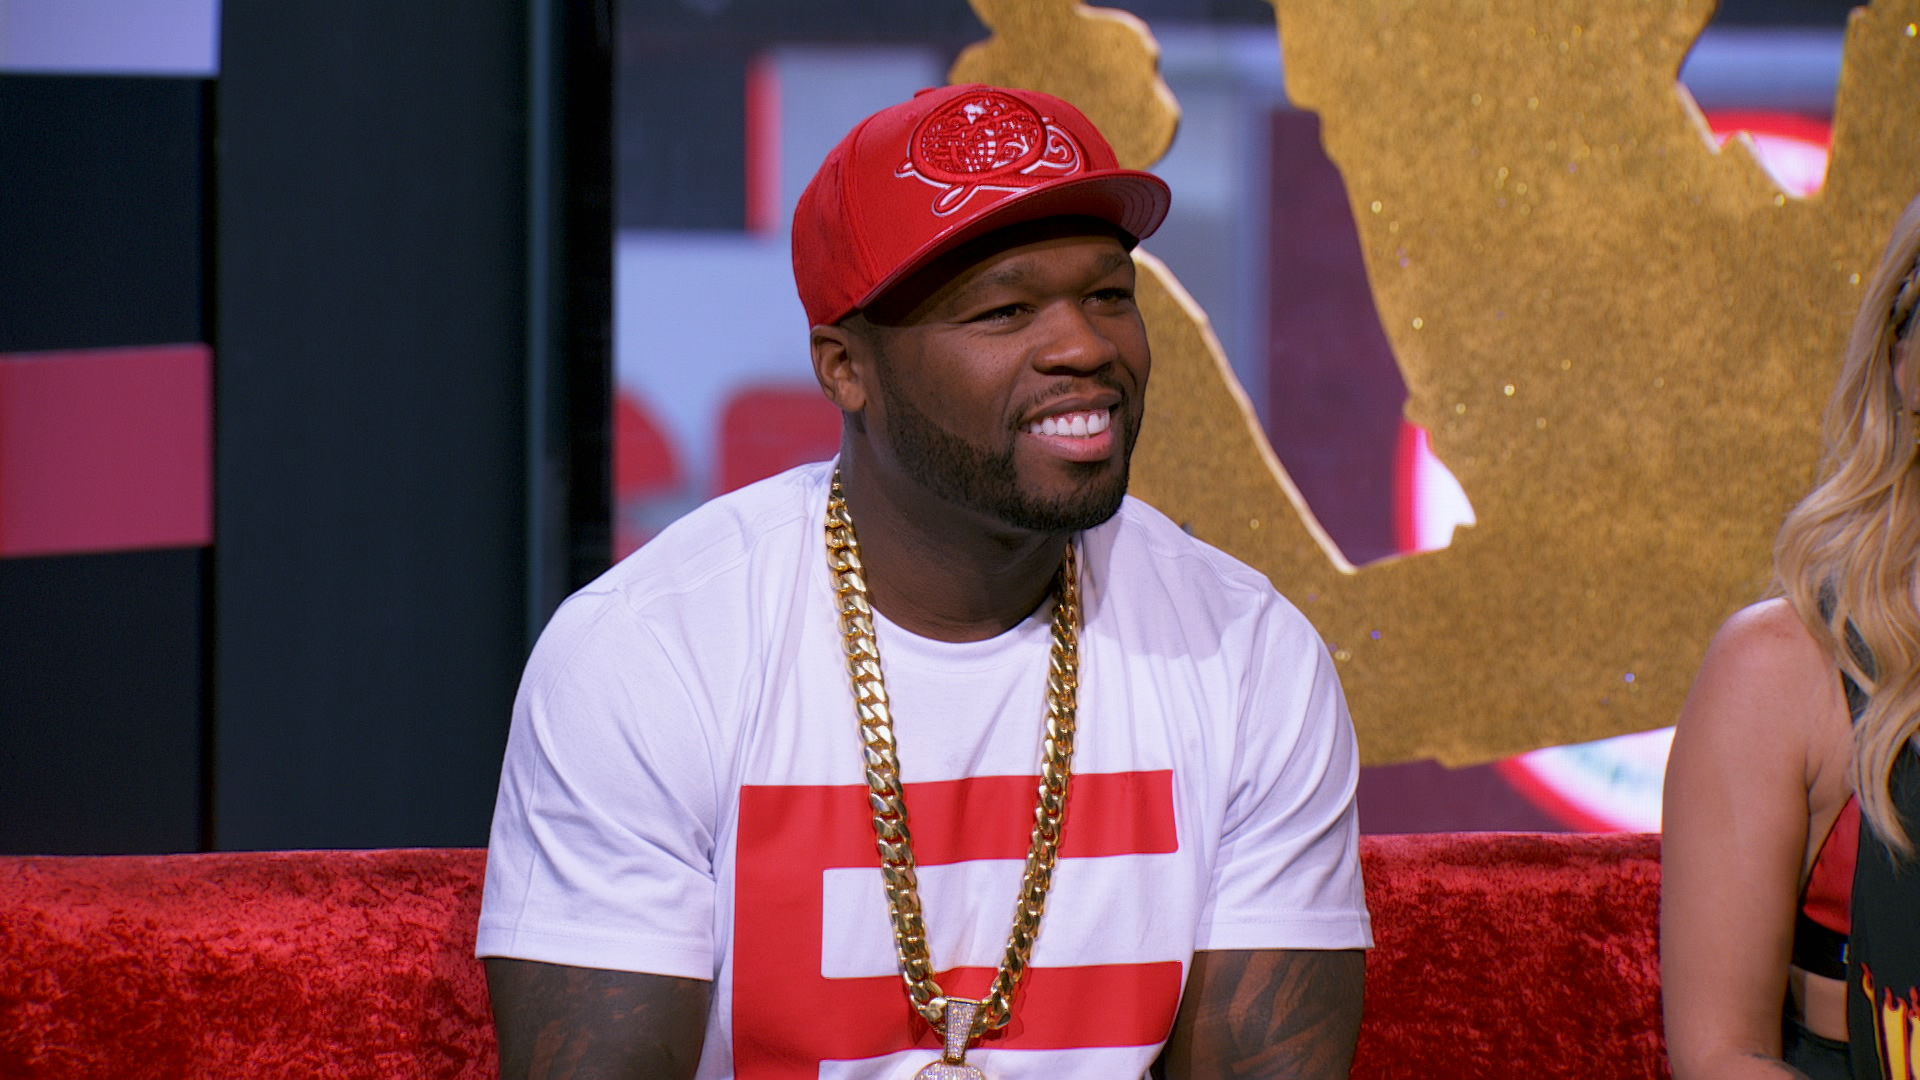 Watch Ridiculousness Season 7 Episode 1 50 Cent Full show on